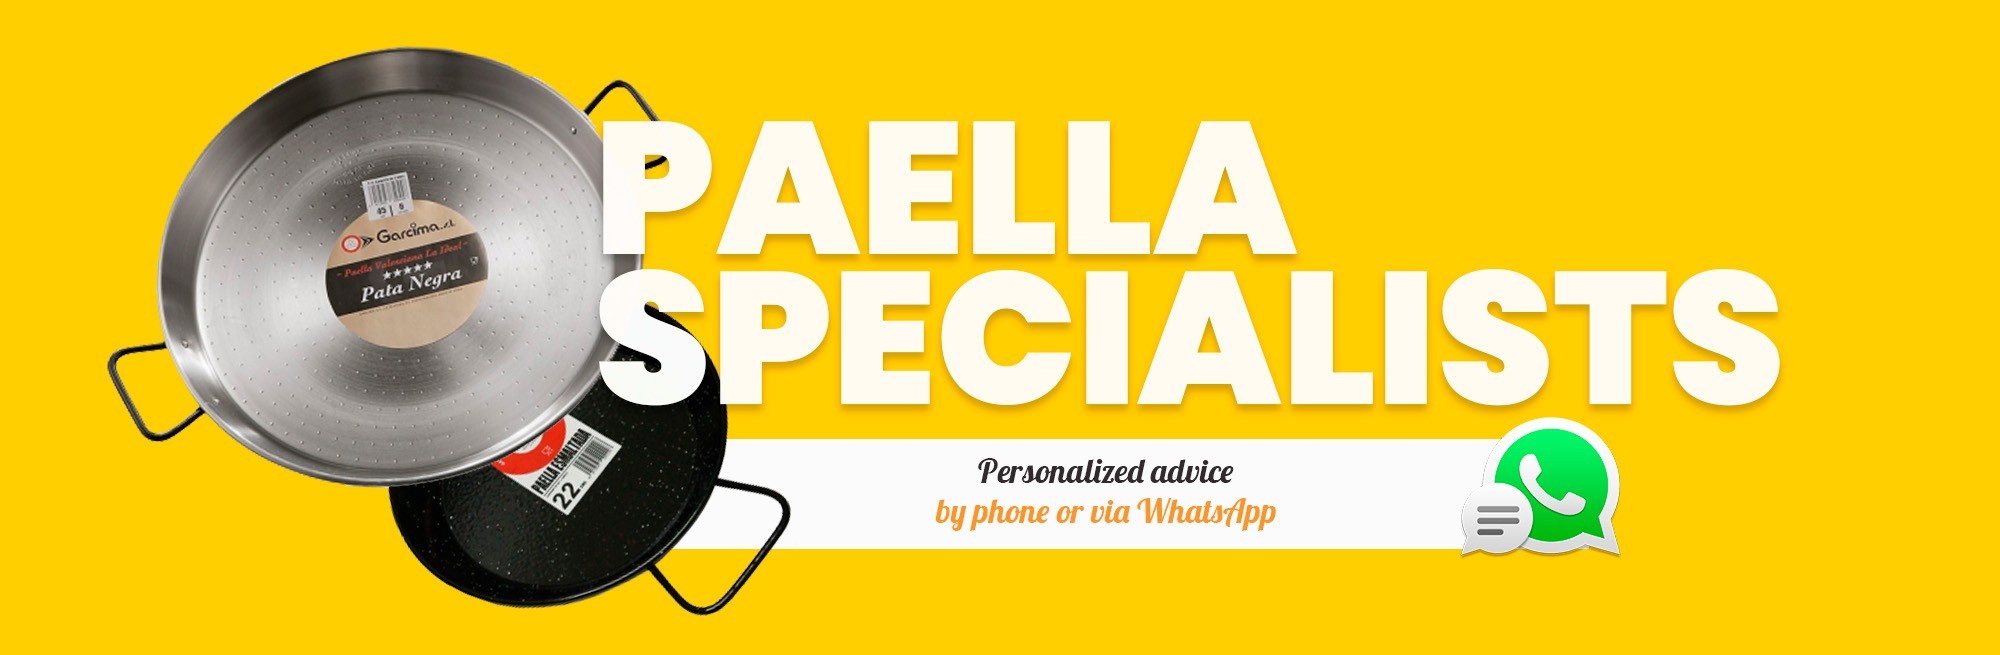 Paella specialists